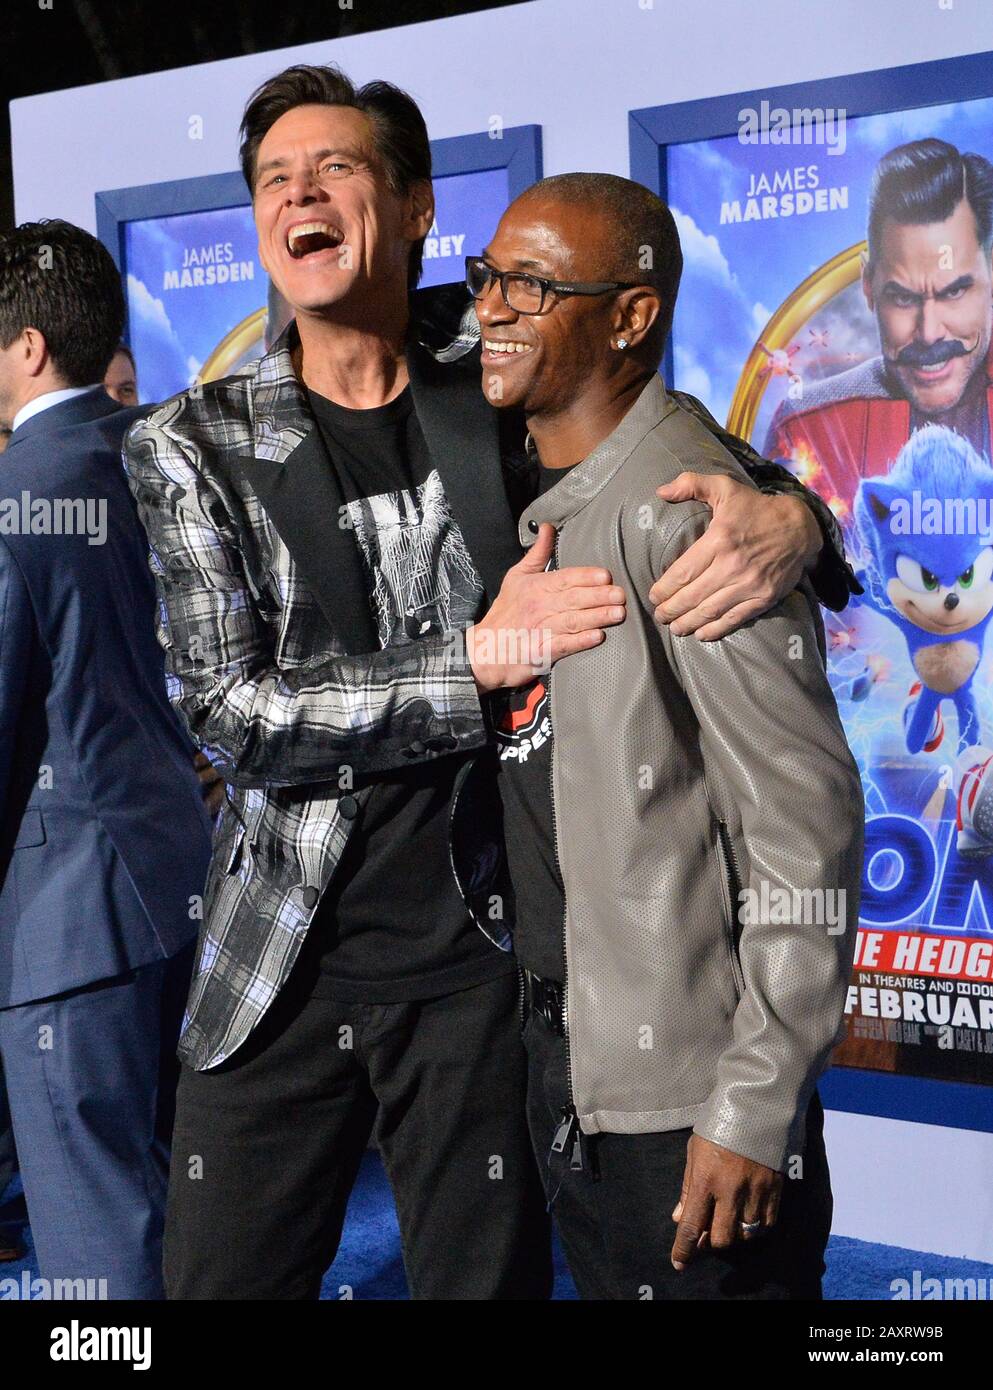 Los Angeles, California, USA. 12th Feb, 2020. Cast member Jim Carrey and Tommy Davidson attend a special screening of the sci-fi family comedy adventure film 'Sonic the Hedgehog' at the Regency Village Theatre in the Westwood section of Los Angeles on Wednesday, February 12, 2020. Storyline: Based on the global blockbuster videogame franchise from Sega, 'Sonic' tells the story of the world's speediest hedgehog as he embraces his new home on Earth. Credit: UPI/Alamy Live News Stock Photo